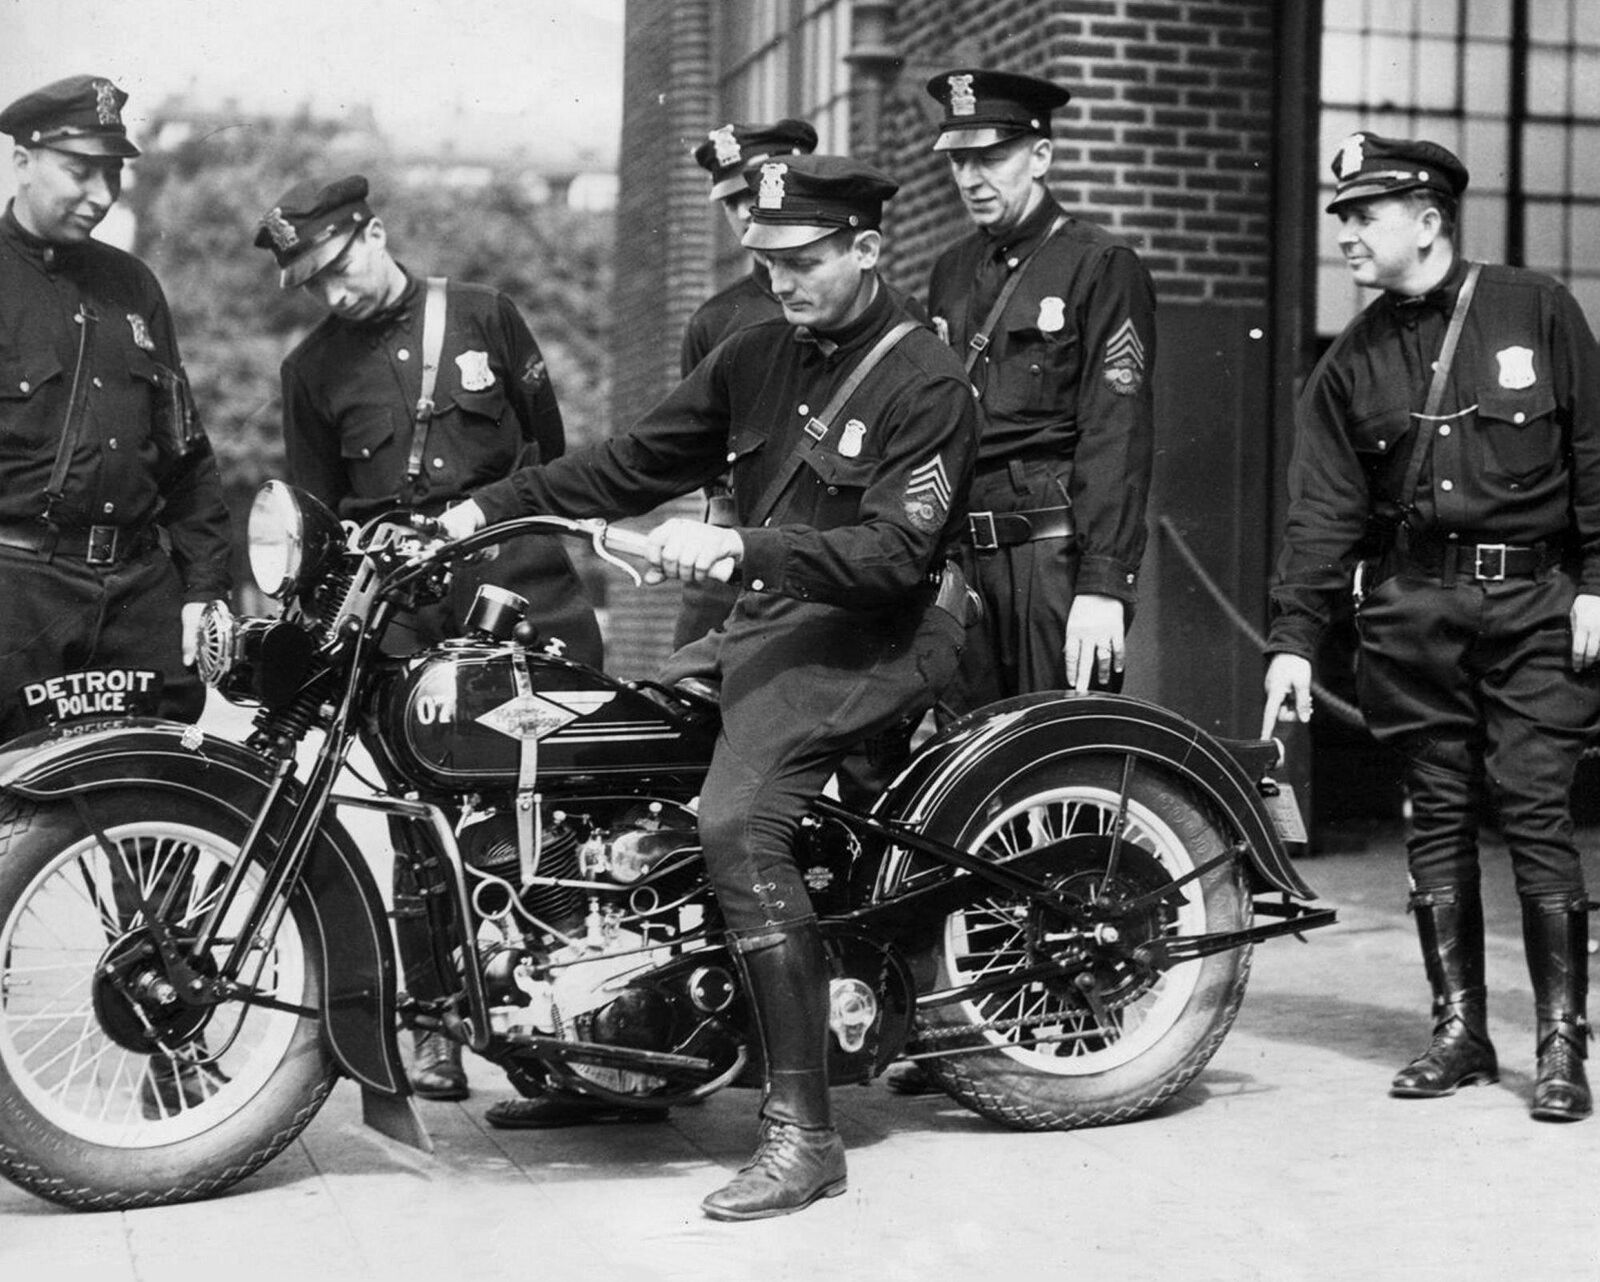 1934 DETROIT POLICE MOTORCYCLE Photo  (223-L)